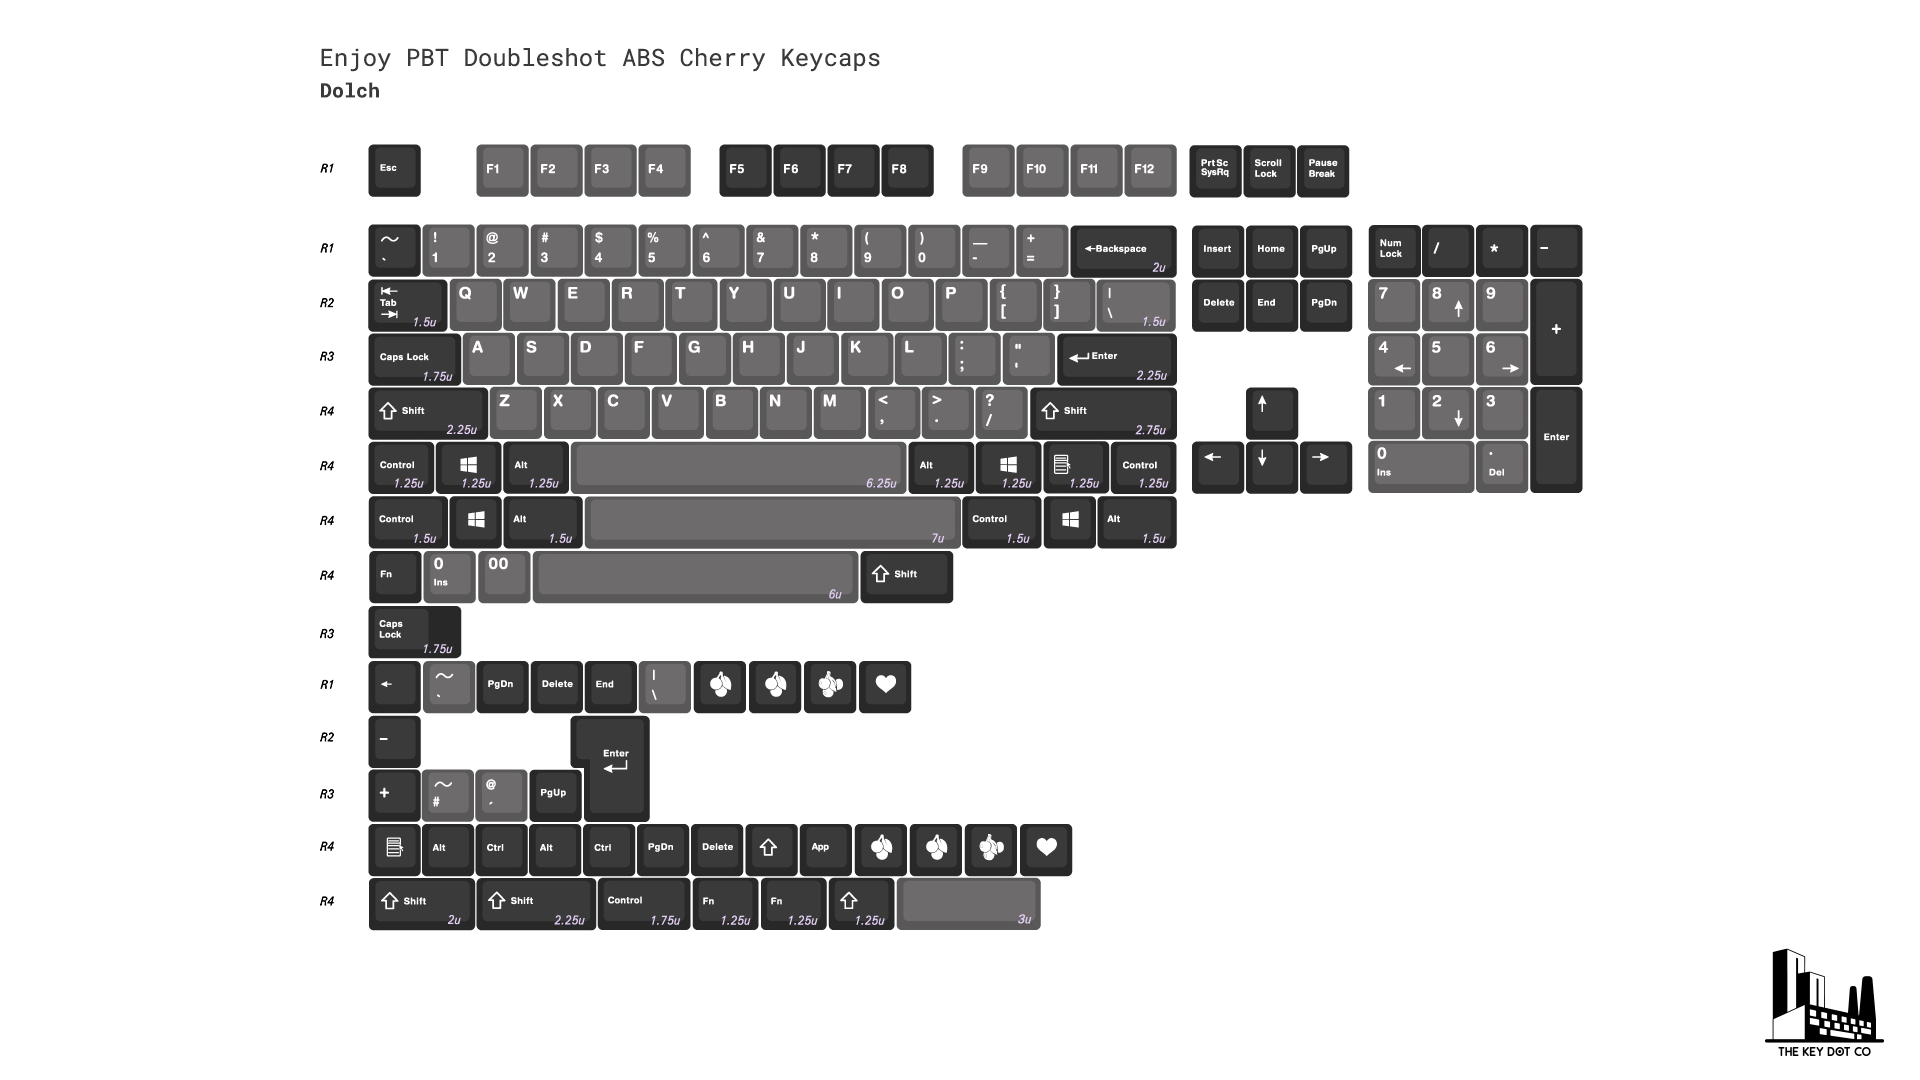 ePBT Doubleshot ABS Cherry Keycaps - Dolch